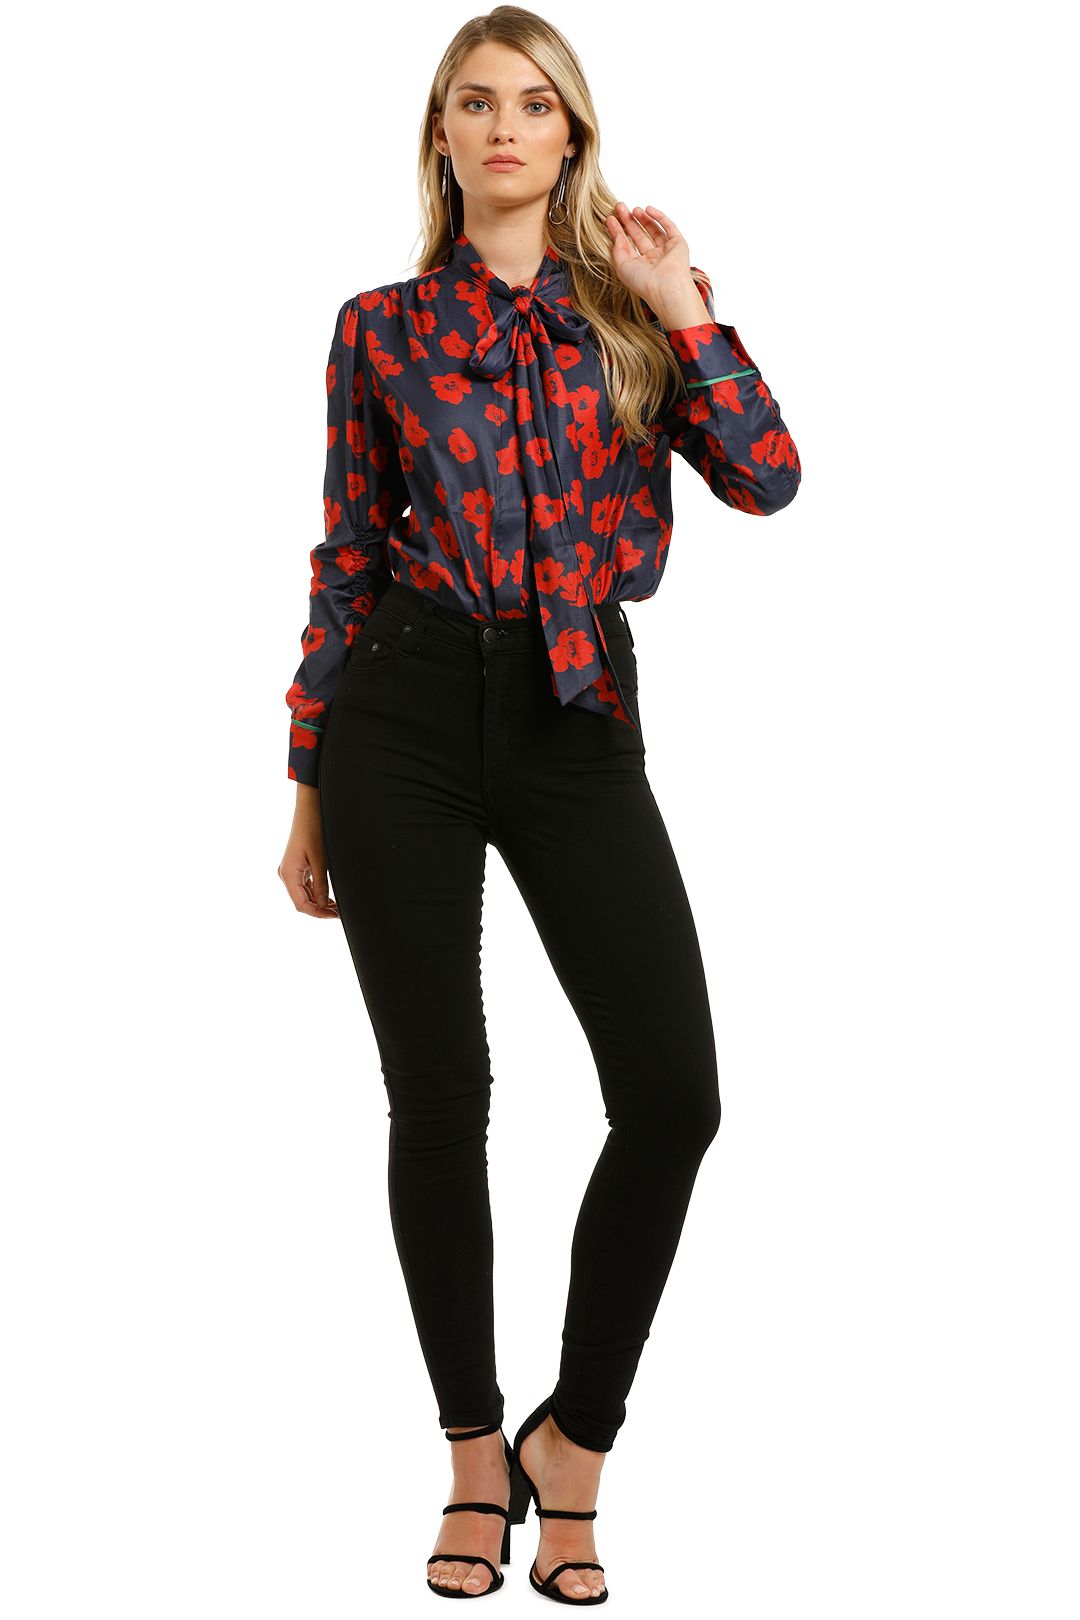 Grace-Willow-River-Blouse-Red-Poppy-Print-Front